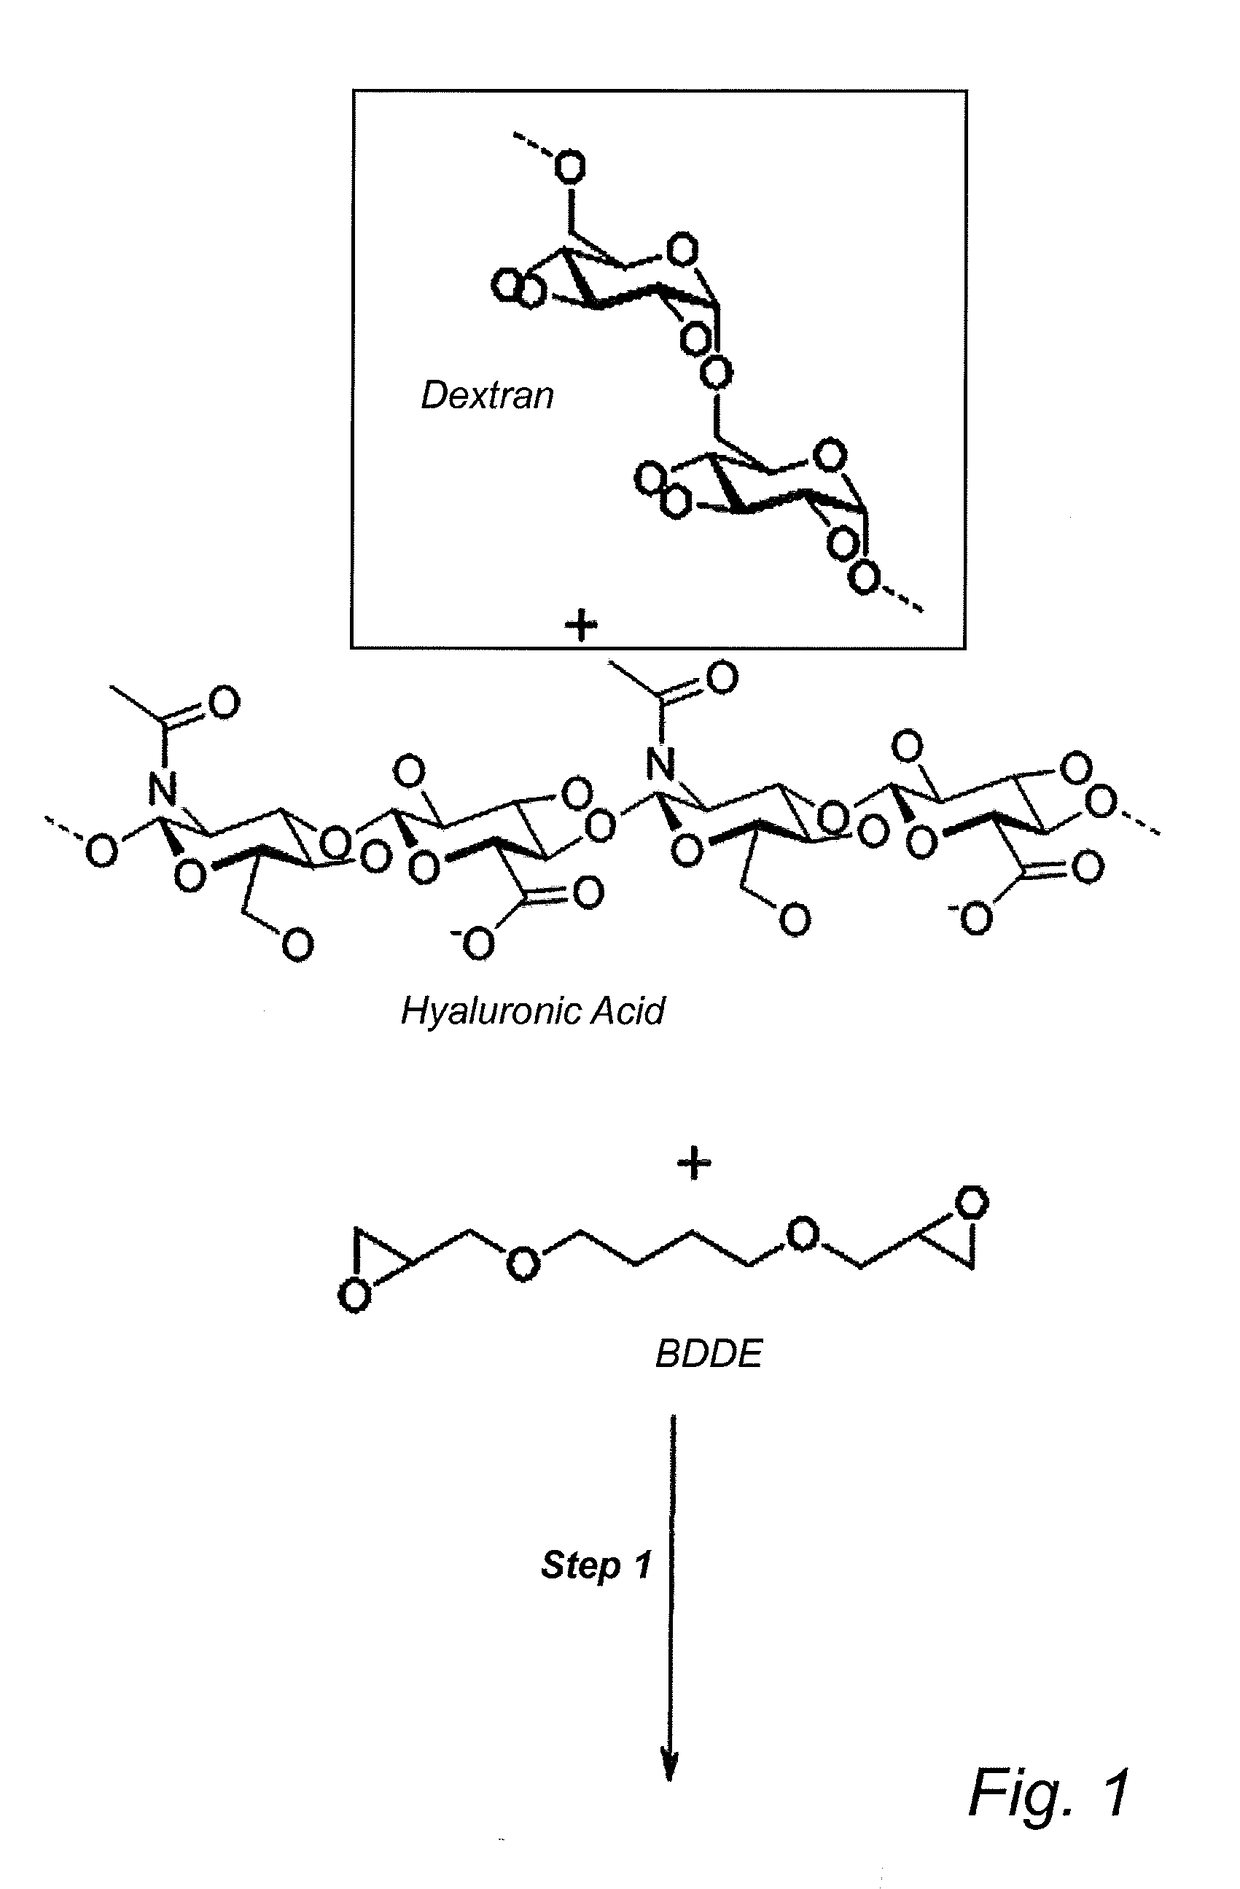 Cross-linked polymer mixture of hyaluronic acid and dextran grafted with cyclodextrins and uses thereof